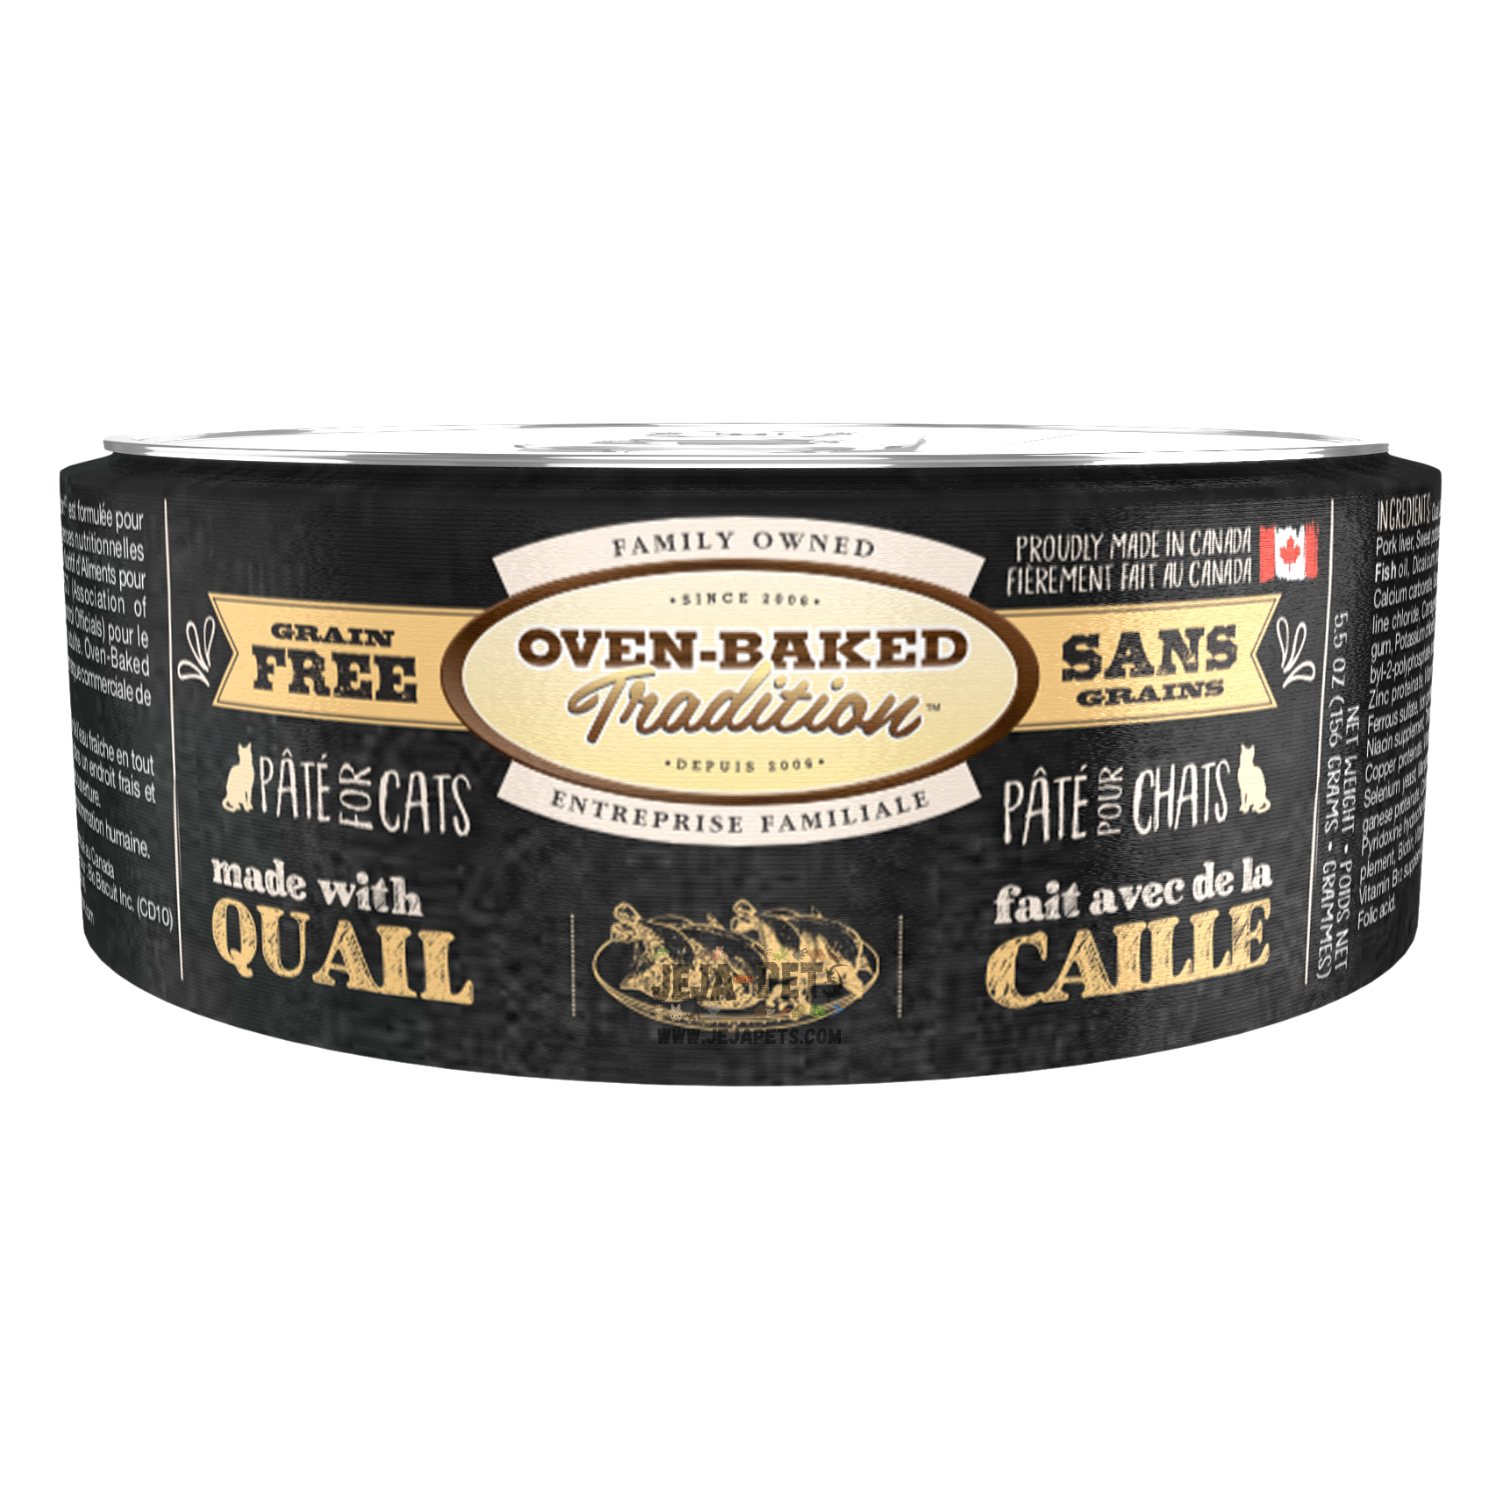 Oven-Baked Tradition (Quail) PÂTÉ Canned Food for Cats - 156g